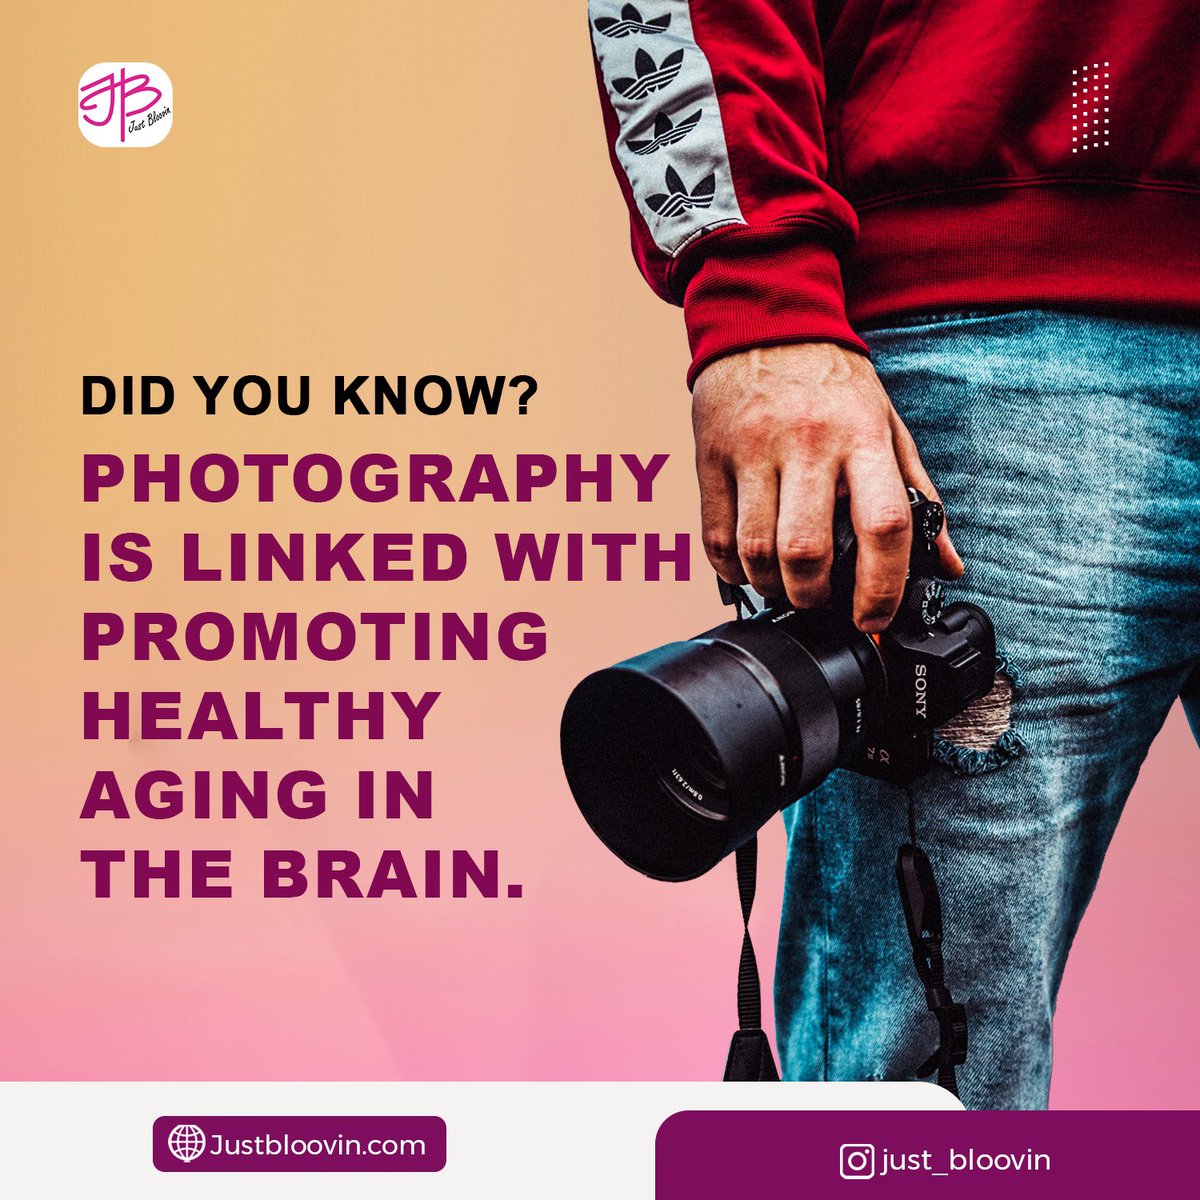 Unbelievable right 😳?! Our 360 pictures/videos does that so don’t miss out send us a dm.

#ibloov #justbloovin #360camera #silentdisco #silentdiscoheadset #photobooth #silentparty #photography #benefitofphotography #didyouknow #nigeriatriviaquestions